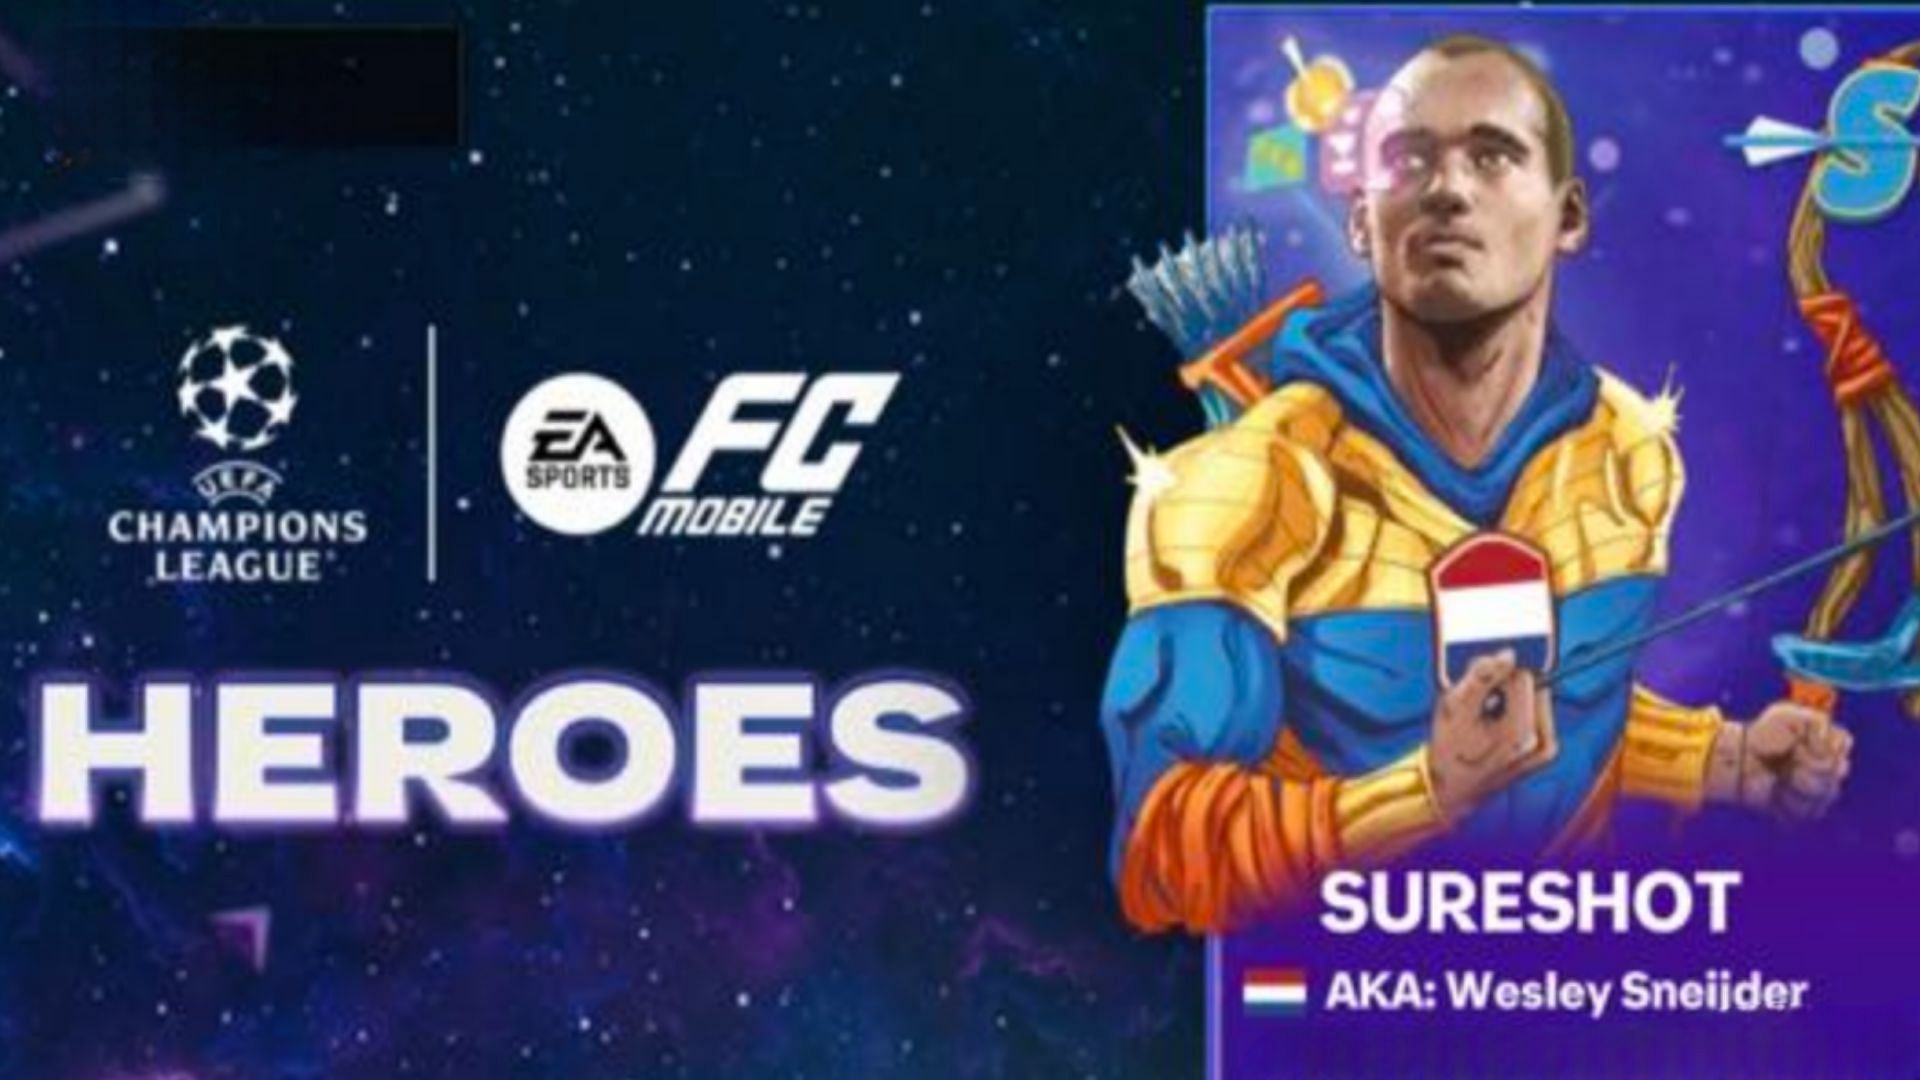 FC Mobile Sureshot Heroes 24 chapter is now live in the title (Image via EA Sports) 